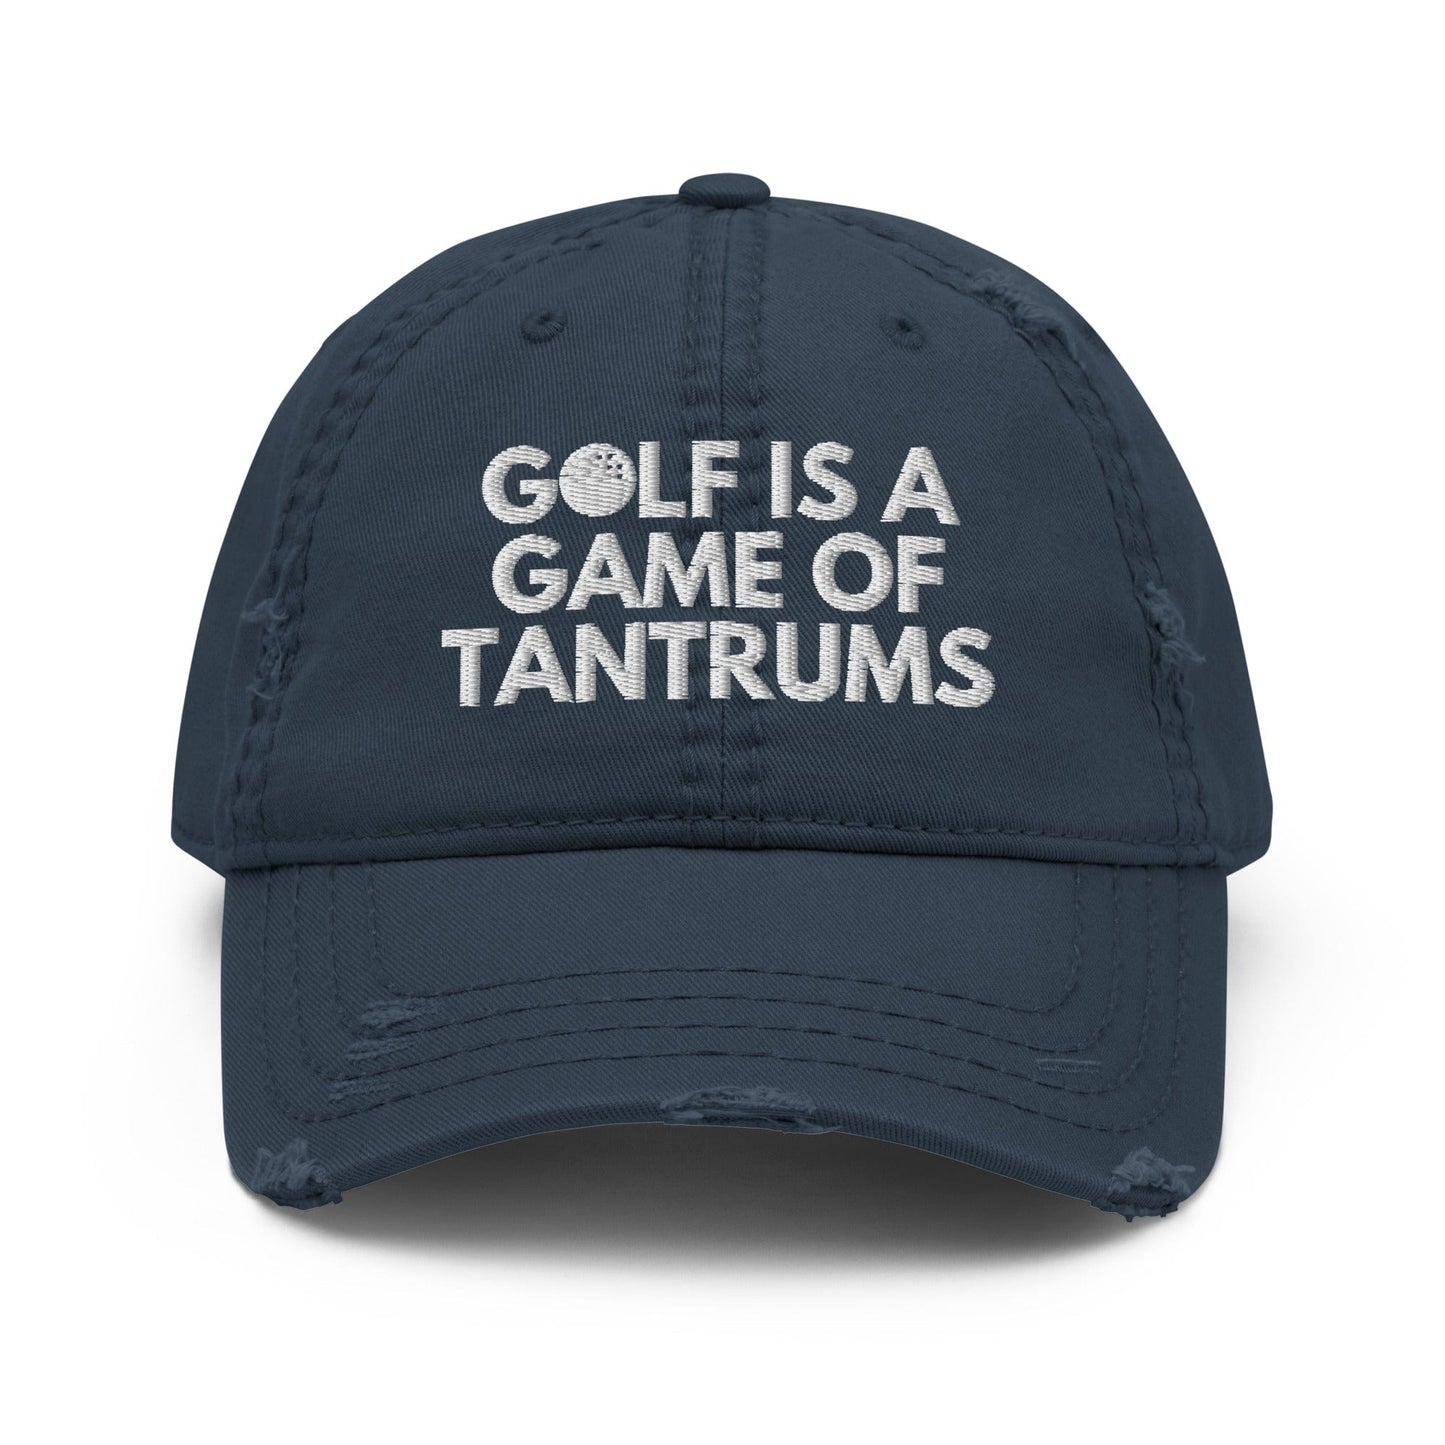 Funny Golfer Gifts  Distressed Cap Navy Golf Is A Game Of Tantrums Hat Distressed Hat